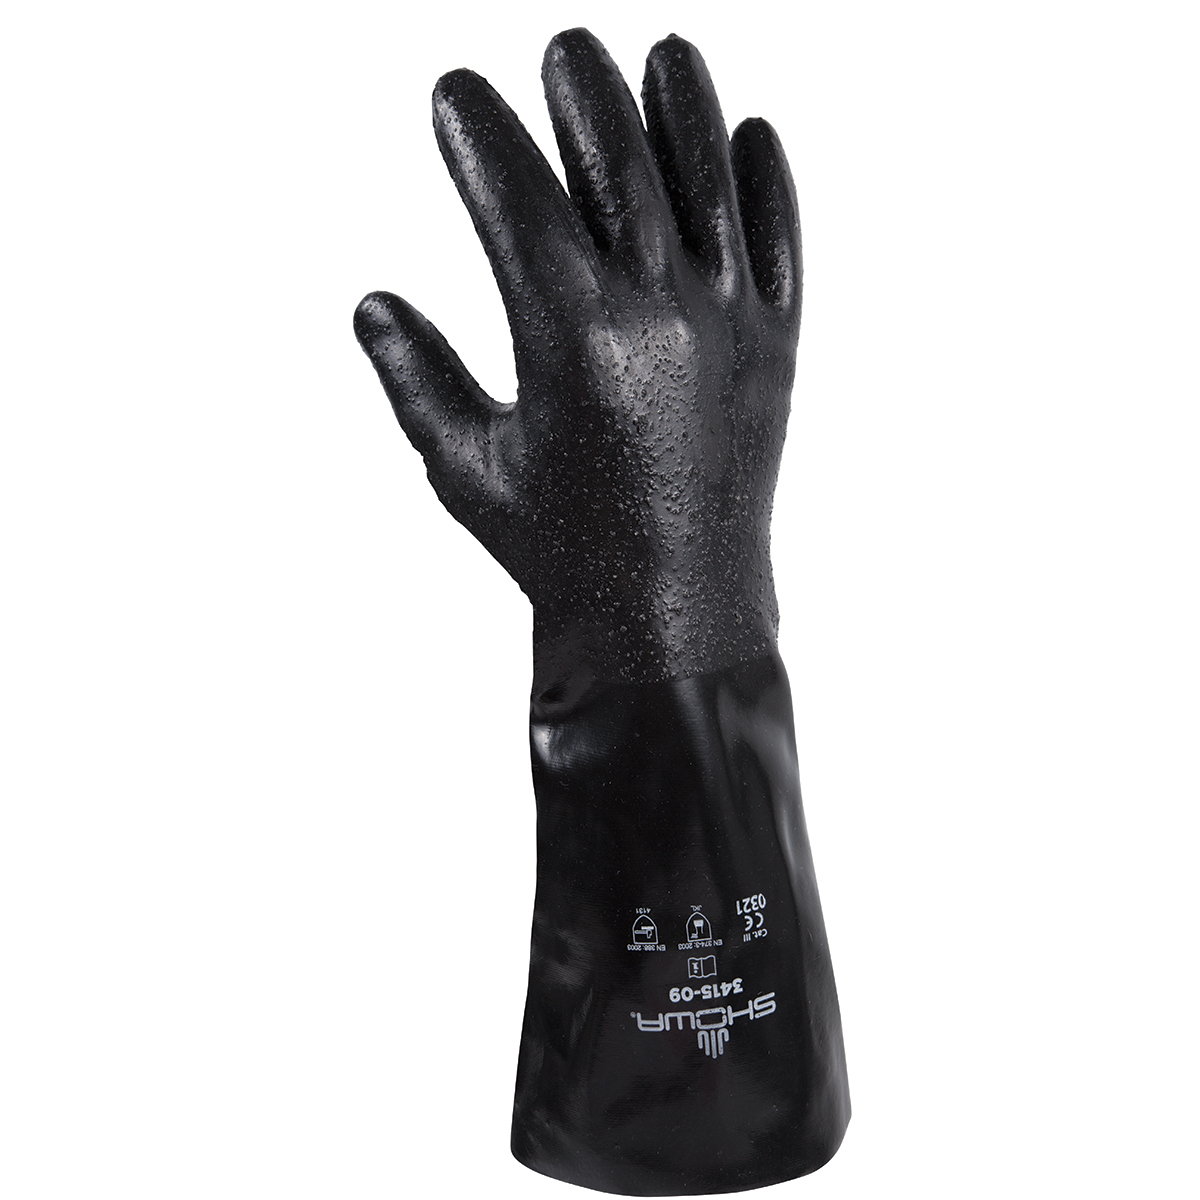 Chemical resistant neoprene, fully coated 14" gauntlet/rough finish, seamless liner, navy /large